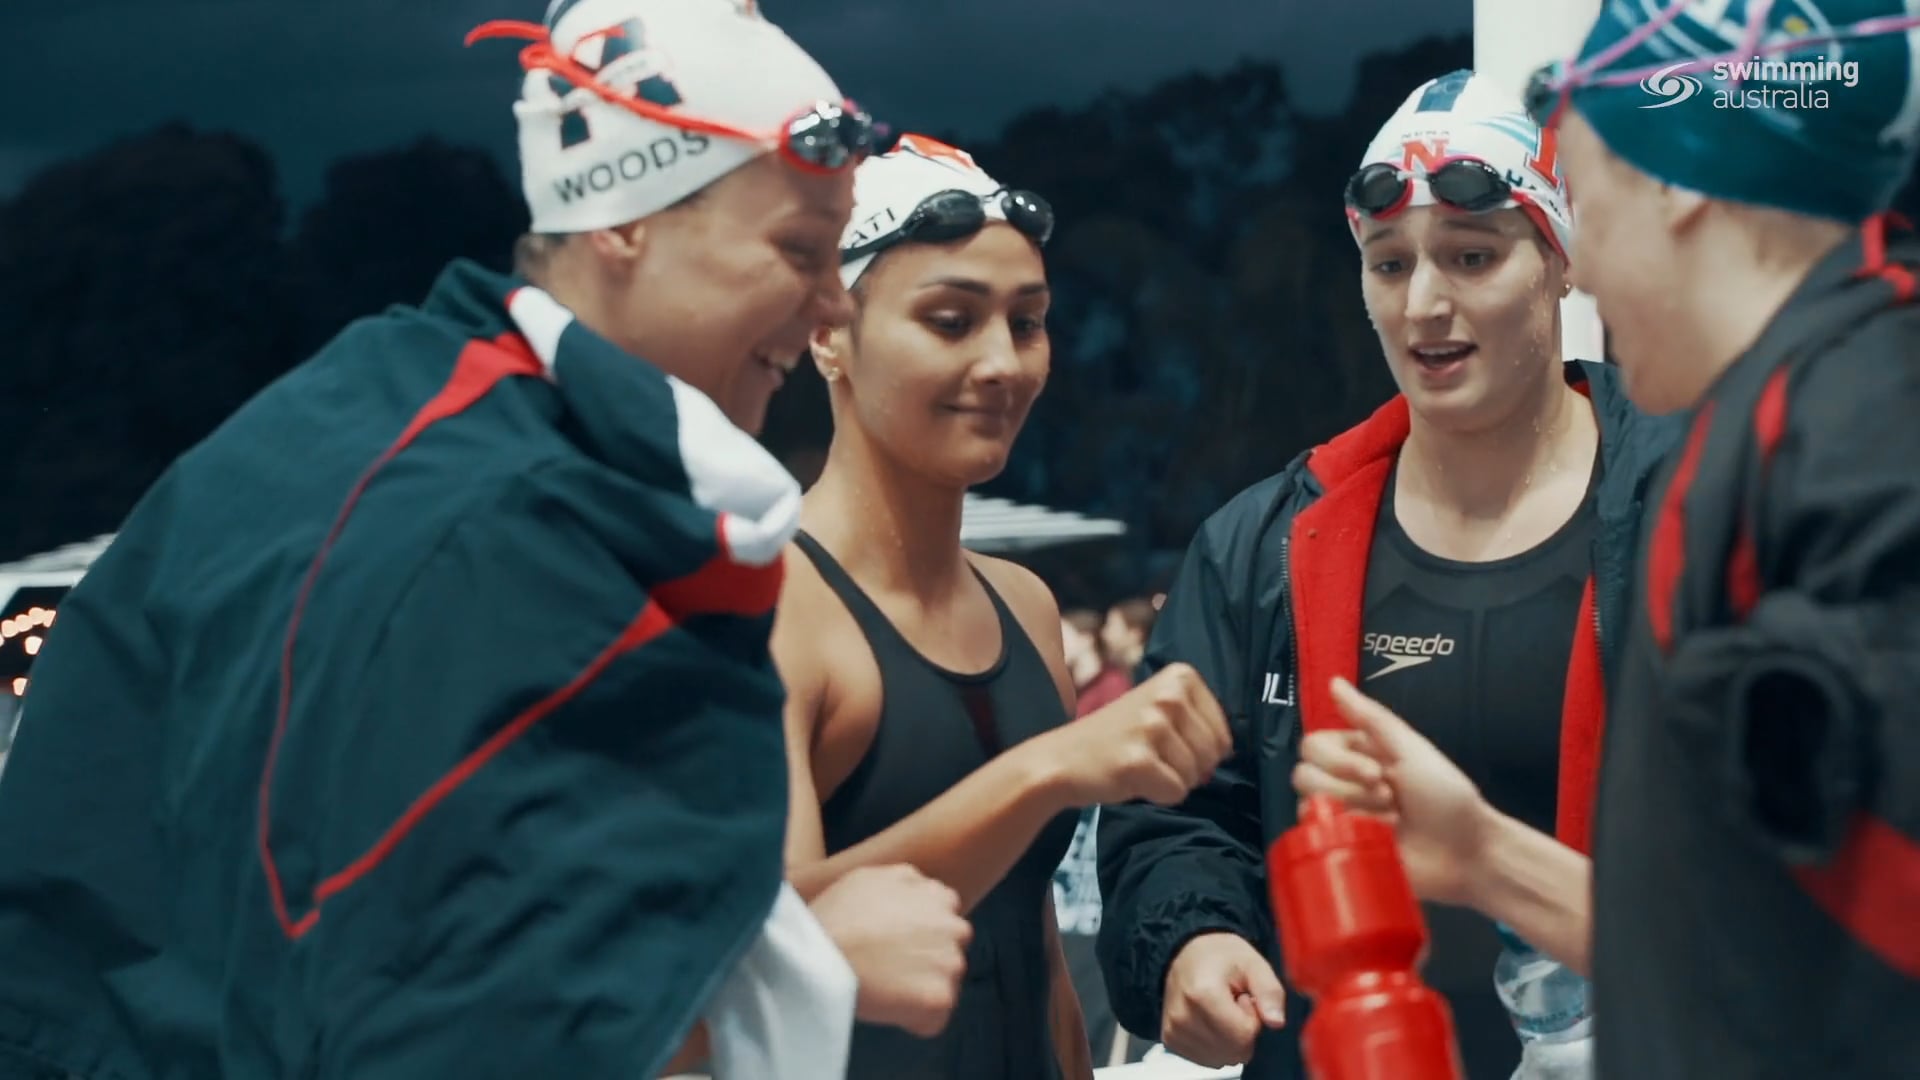 Highlights from the 2019 Hancock Prospecting Australian Short Course Championships